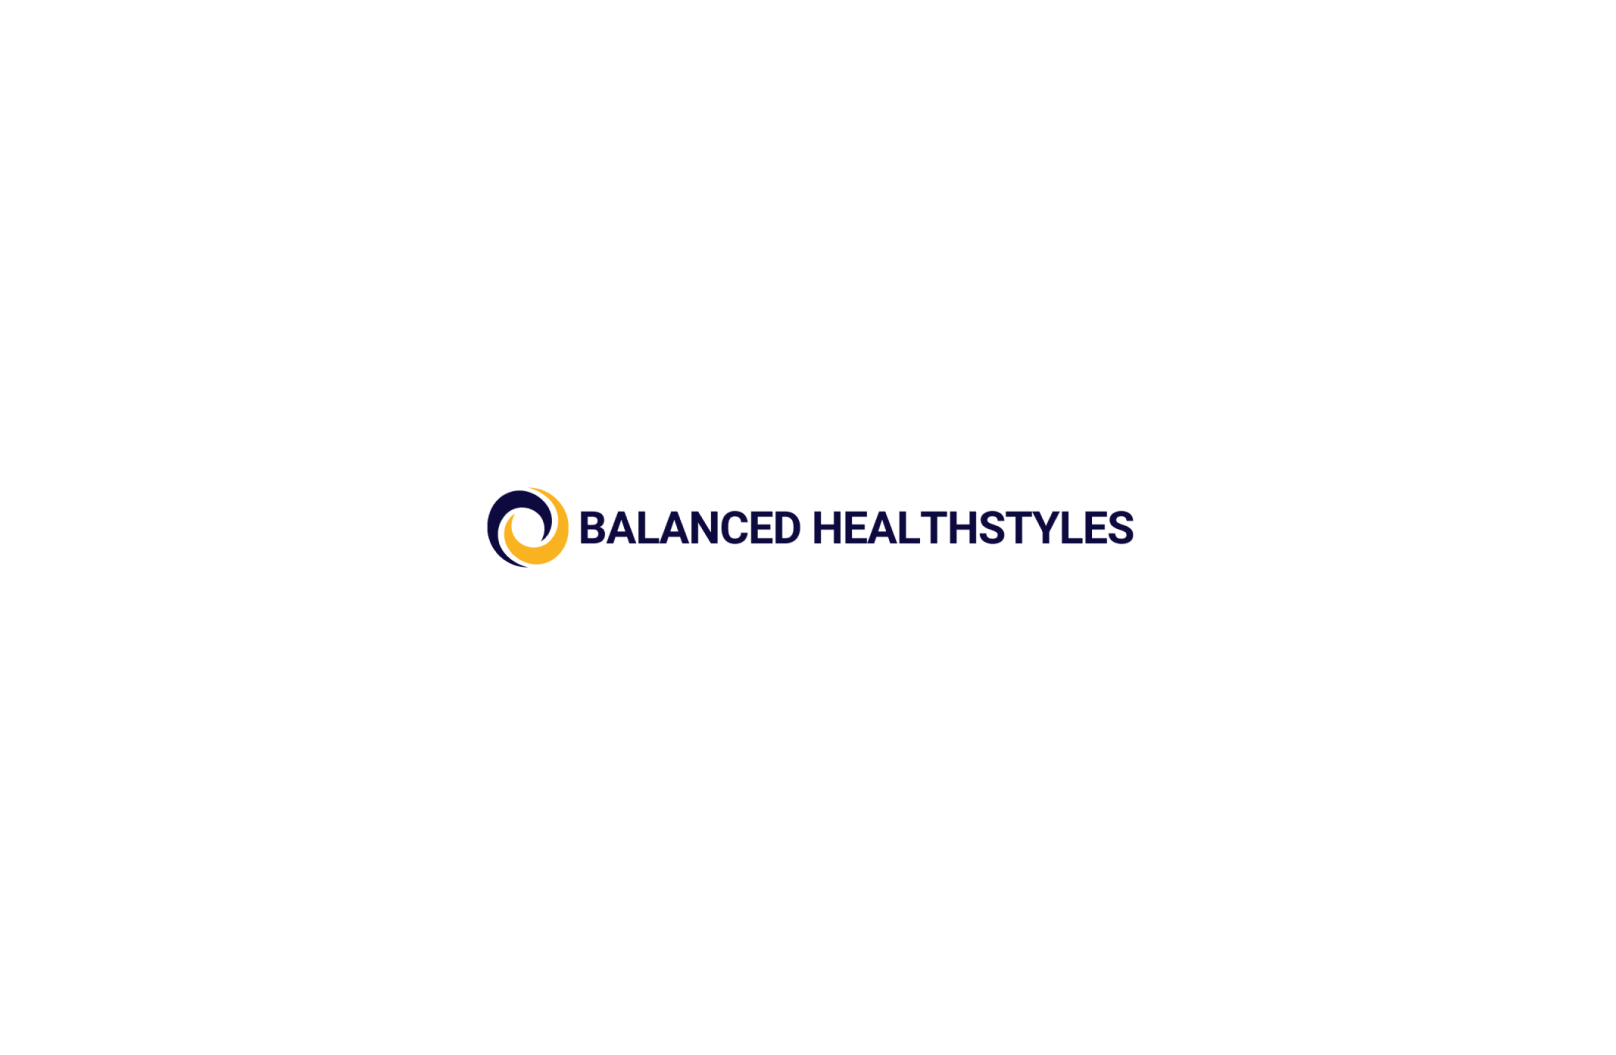 Your Health Matters - Balanced Healthstyles